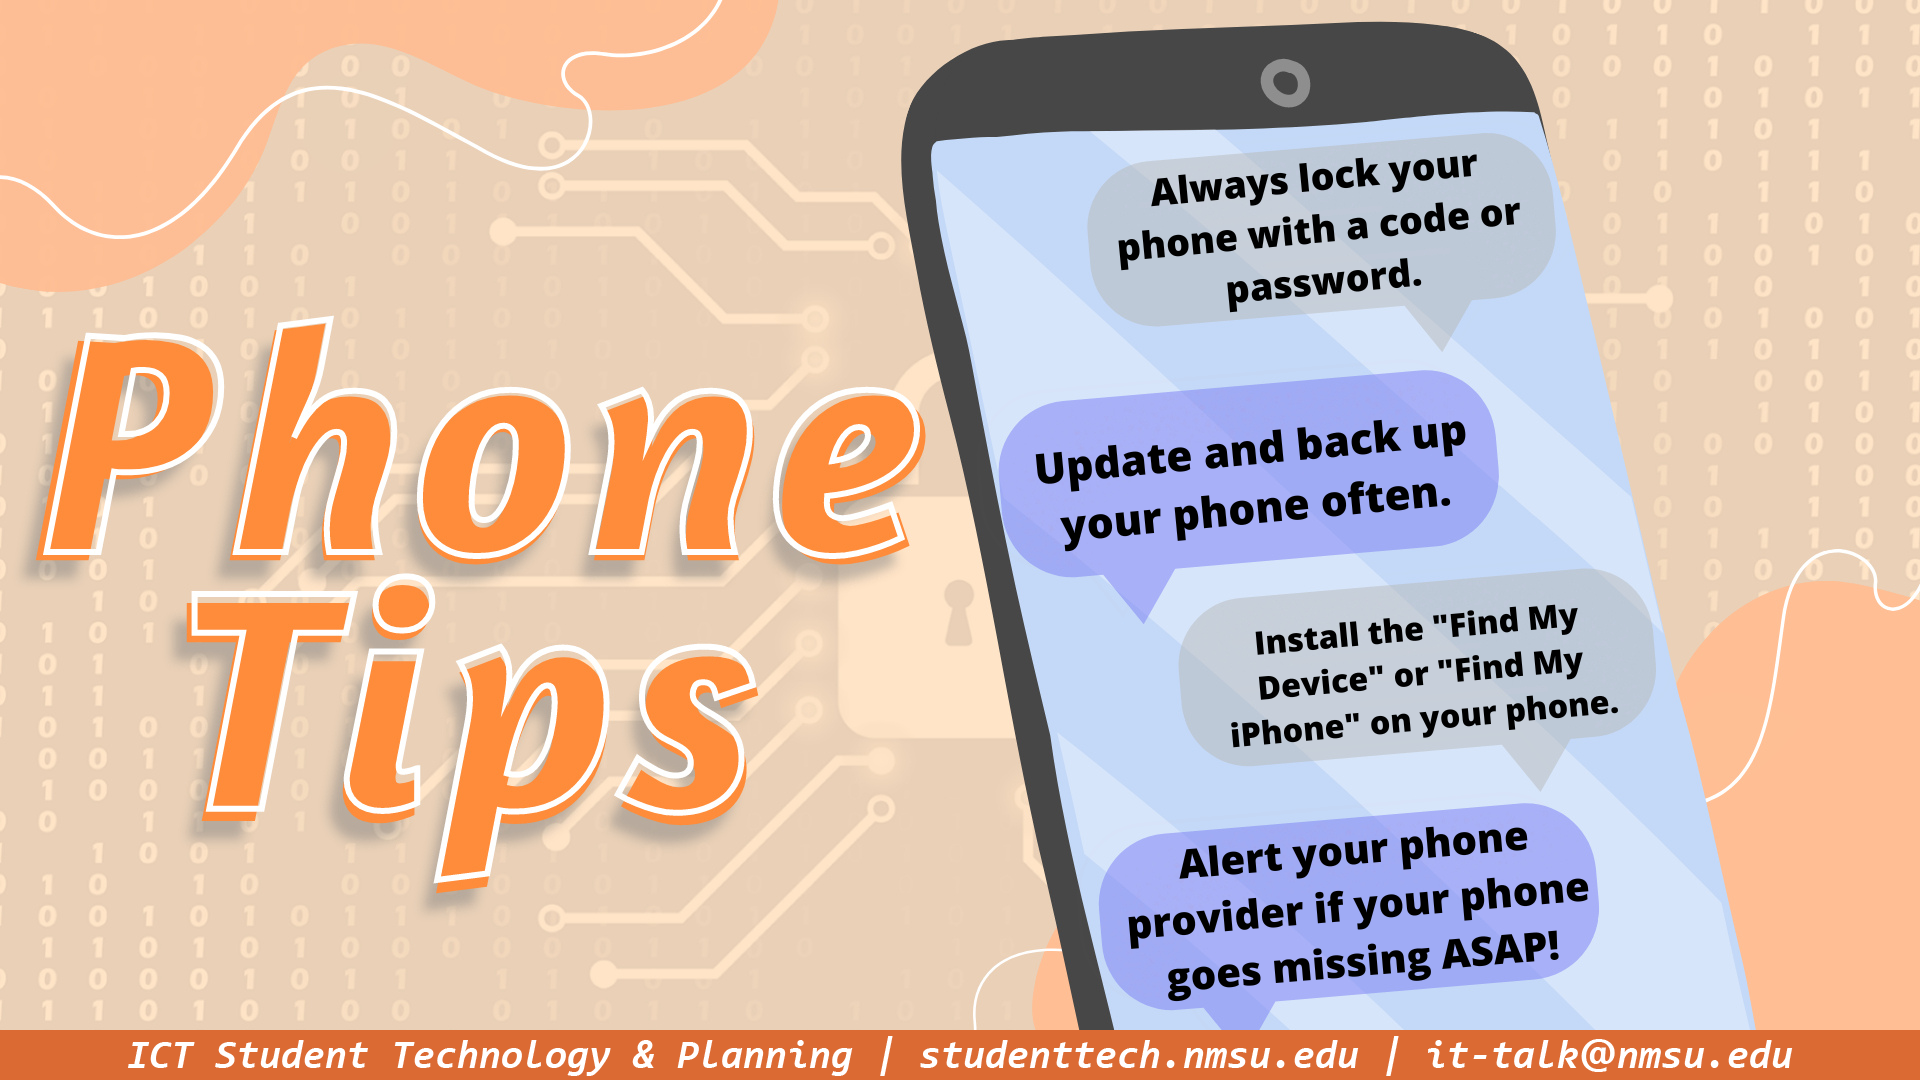 Phone tips - always lock your phone with a code or password. Update and back up your phone often. Install the find my device or find my iPhone apps on your phone. Alert your phone provider if it goes missing ASAP!